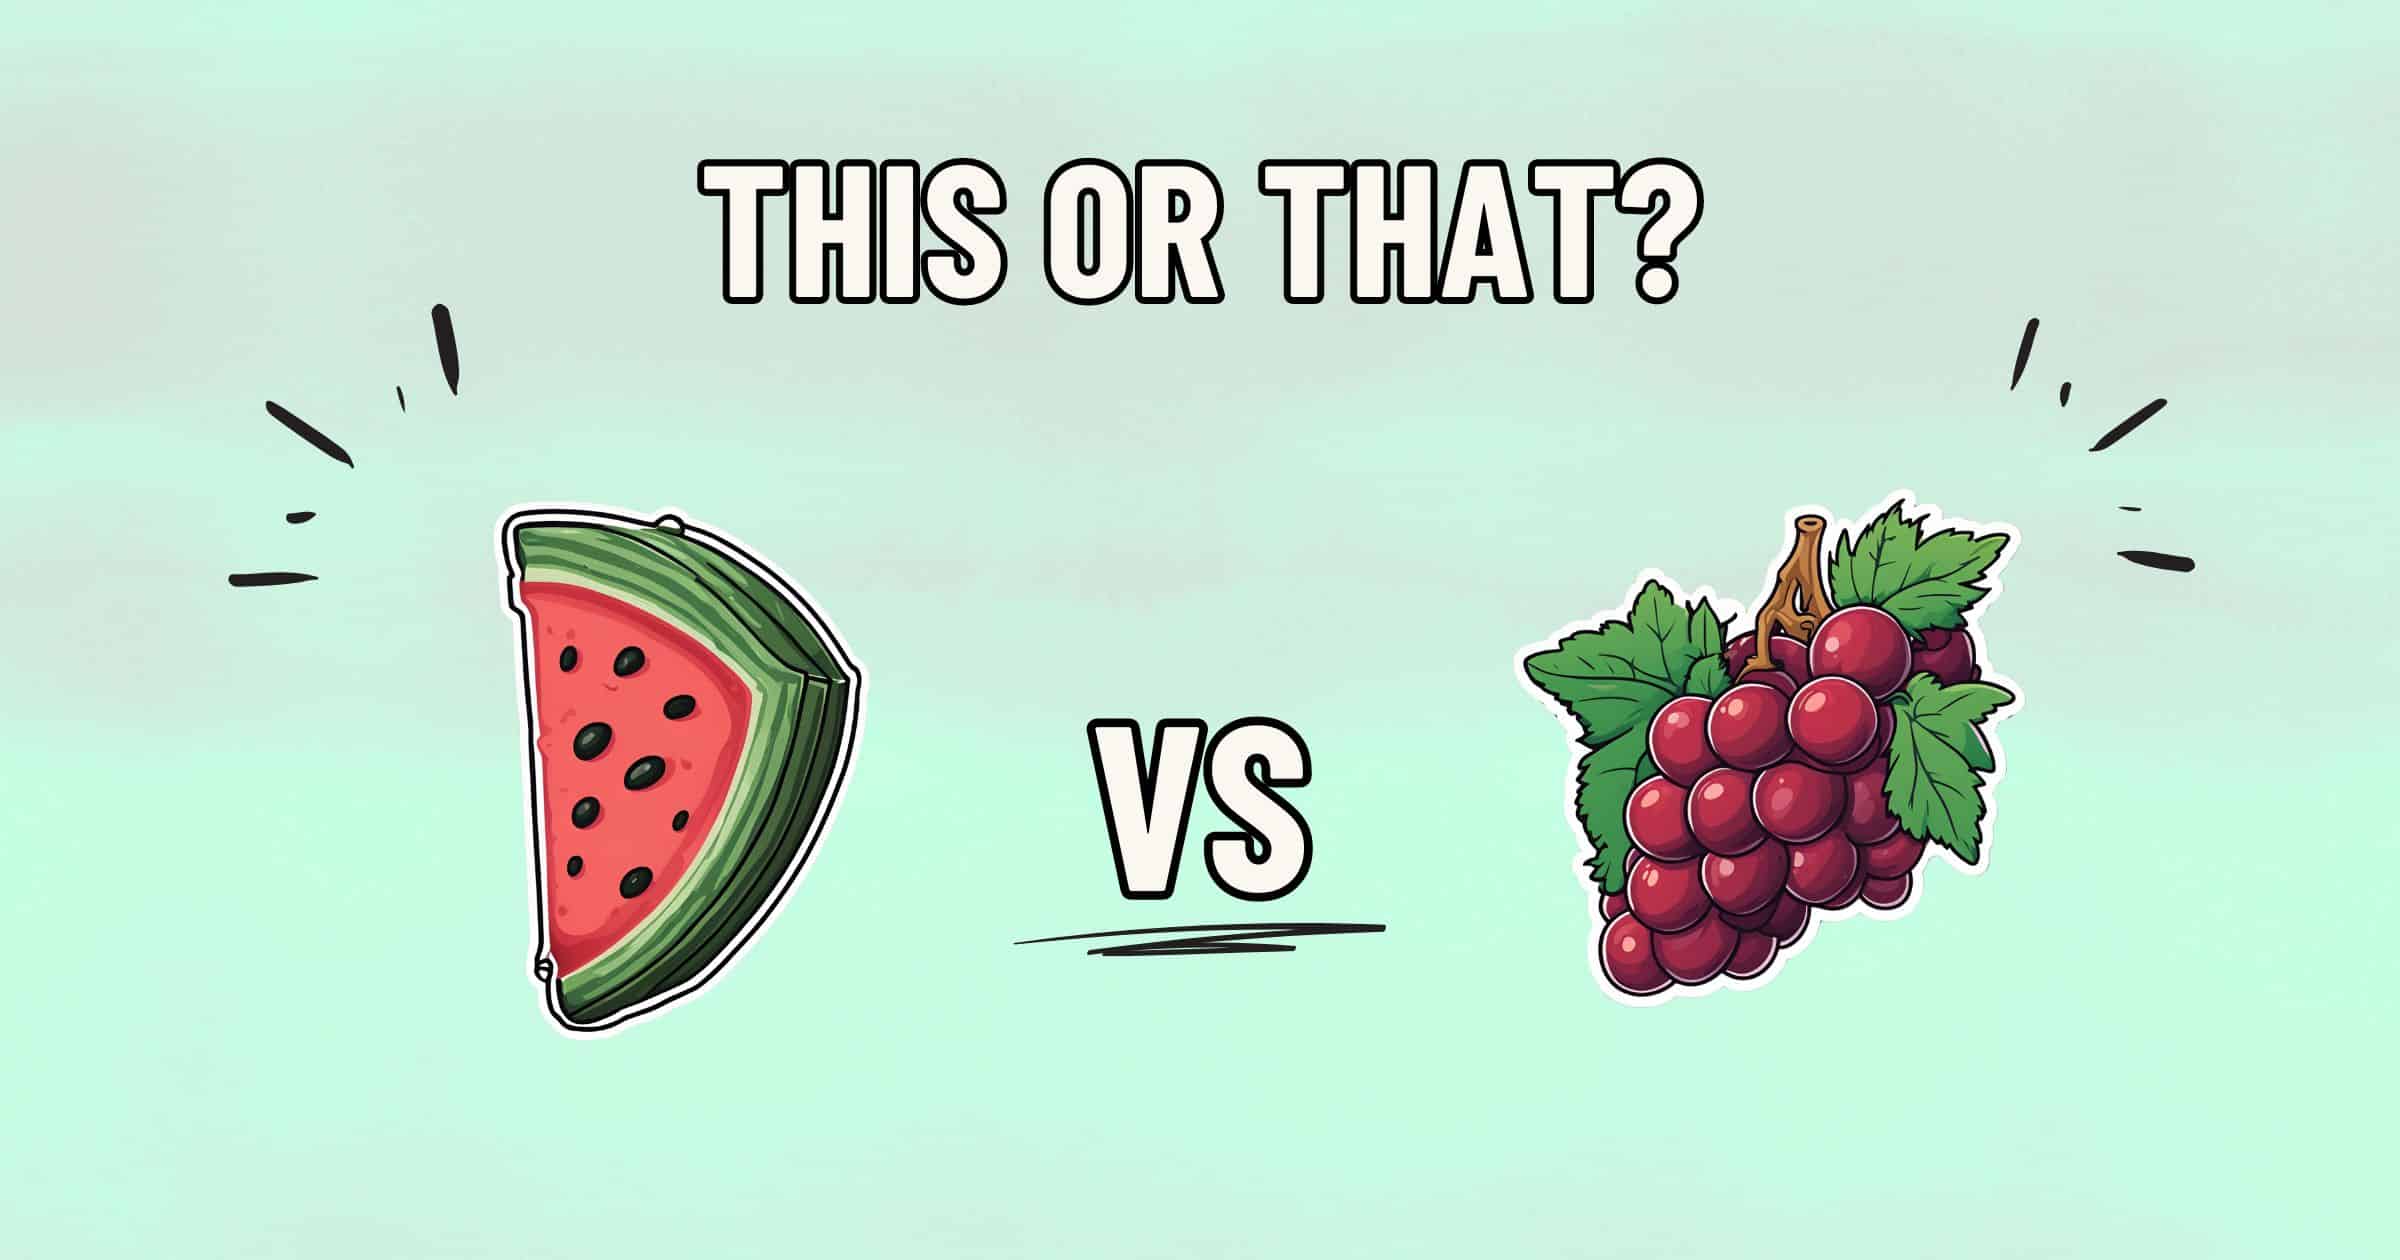 A digital illustration with the text "THIS OR THAT?" at the top. Below is an image of a watermelon slice on the left and a bunch of grapes on the right. The word "VS" is between them, suggesting a comparison or choice between which fruit is healthier: watermelon or grapes.